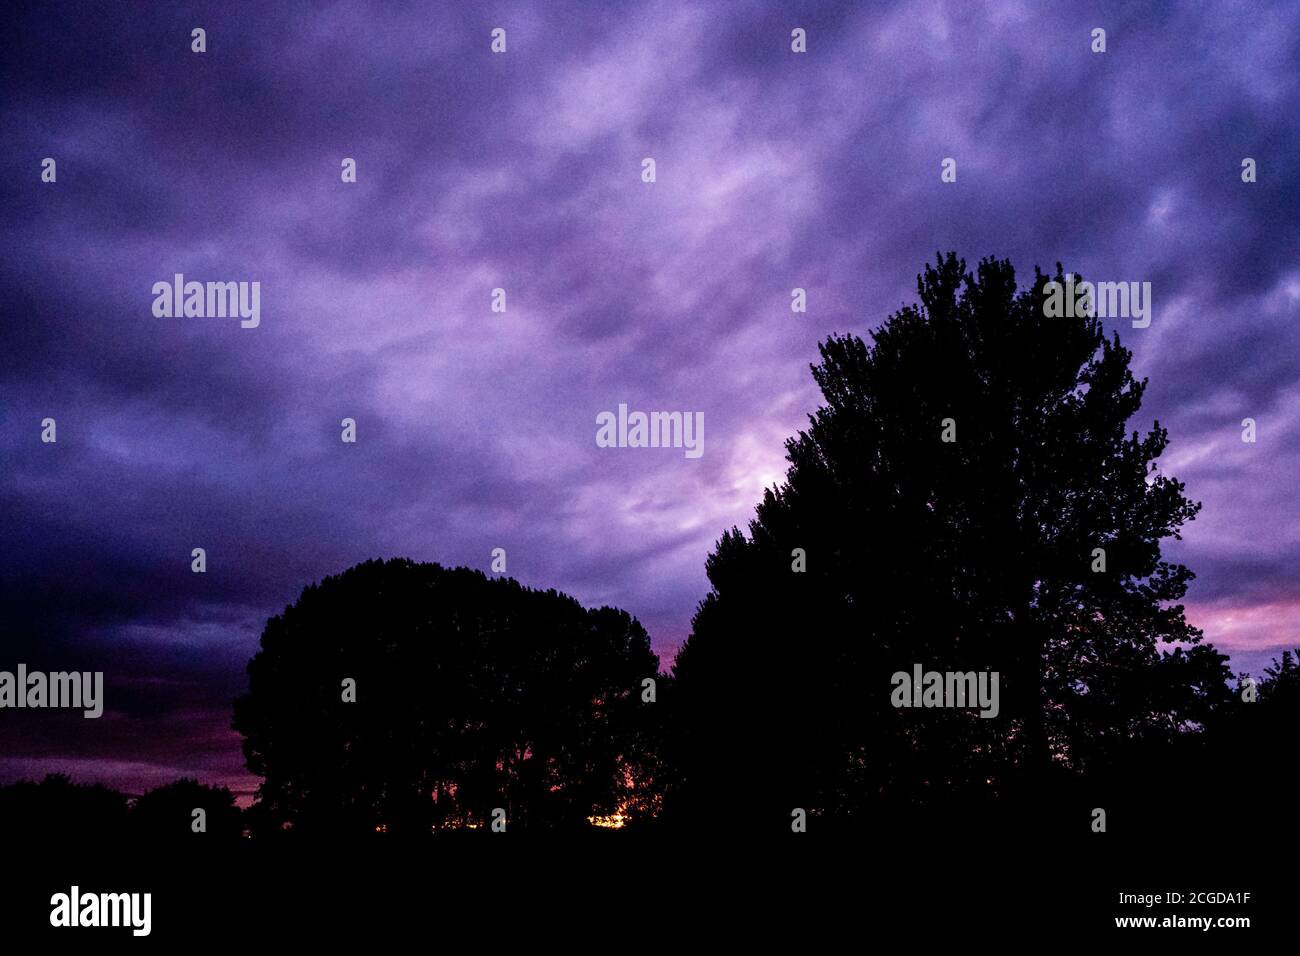 Trees against a dramatic cloudy night sky at sunset, West Bridgford, Nottinghamshire, England, UK Stock Photo